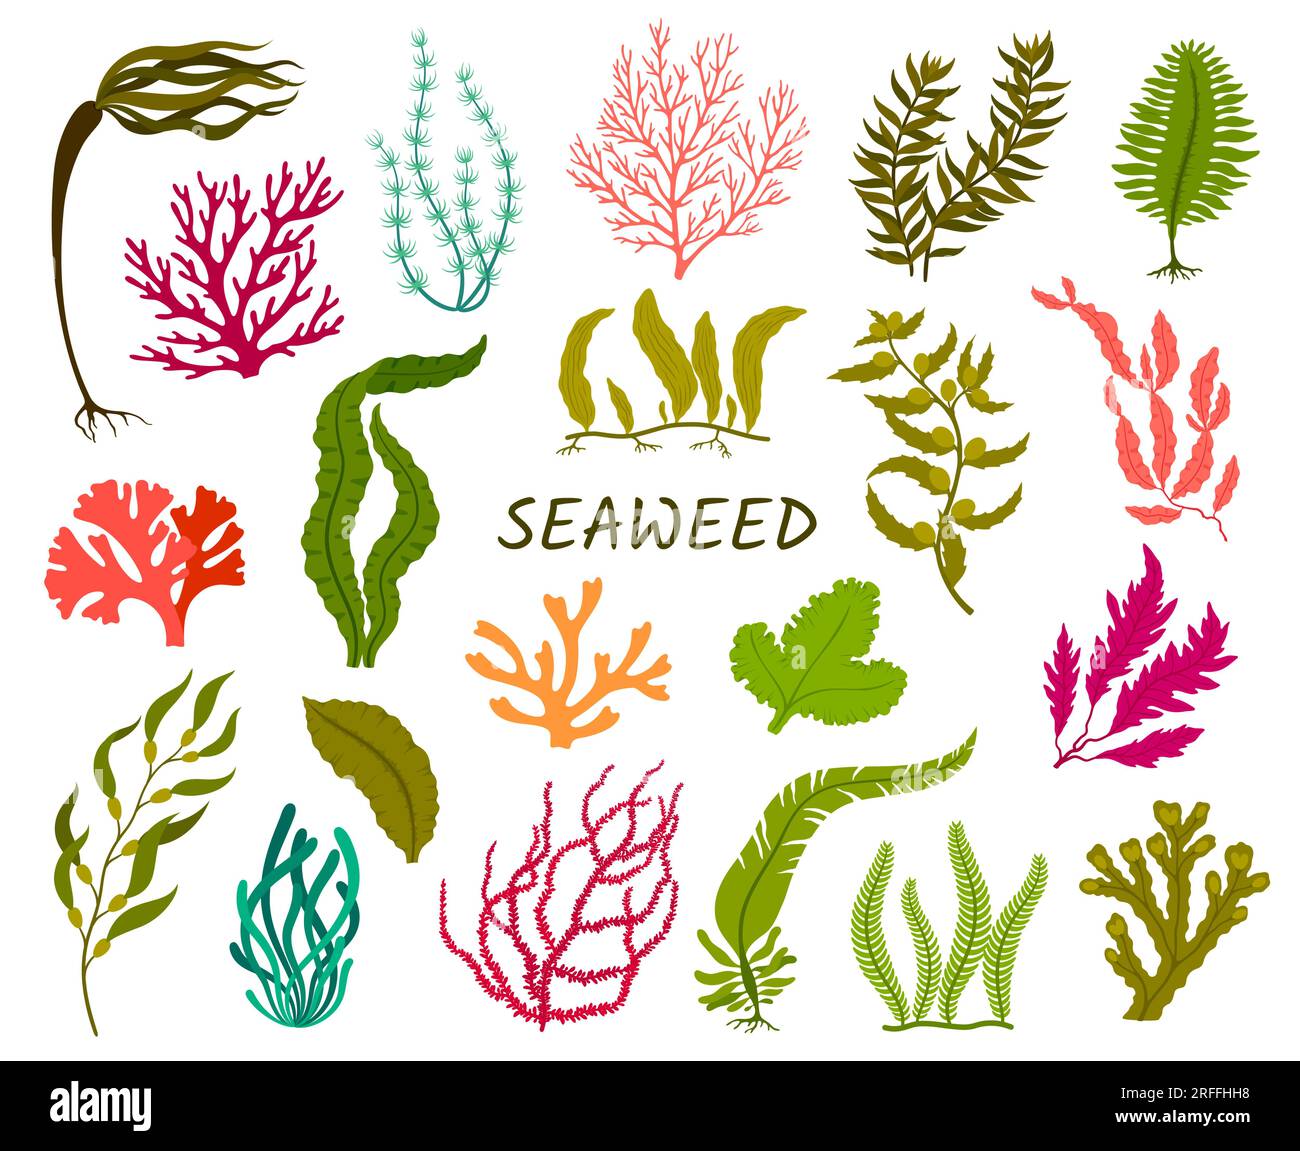 Laminaria kelp underwater Stock Vector Images - Page 2 - Alamy